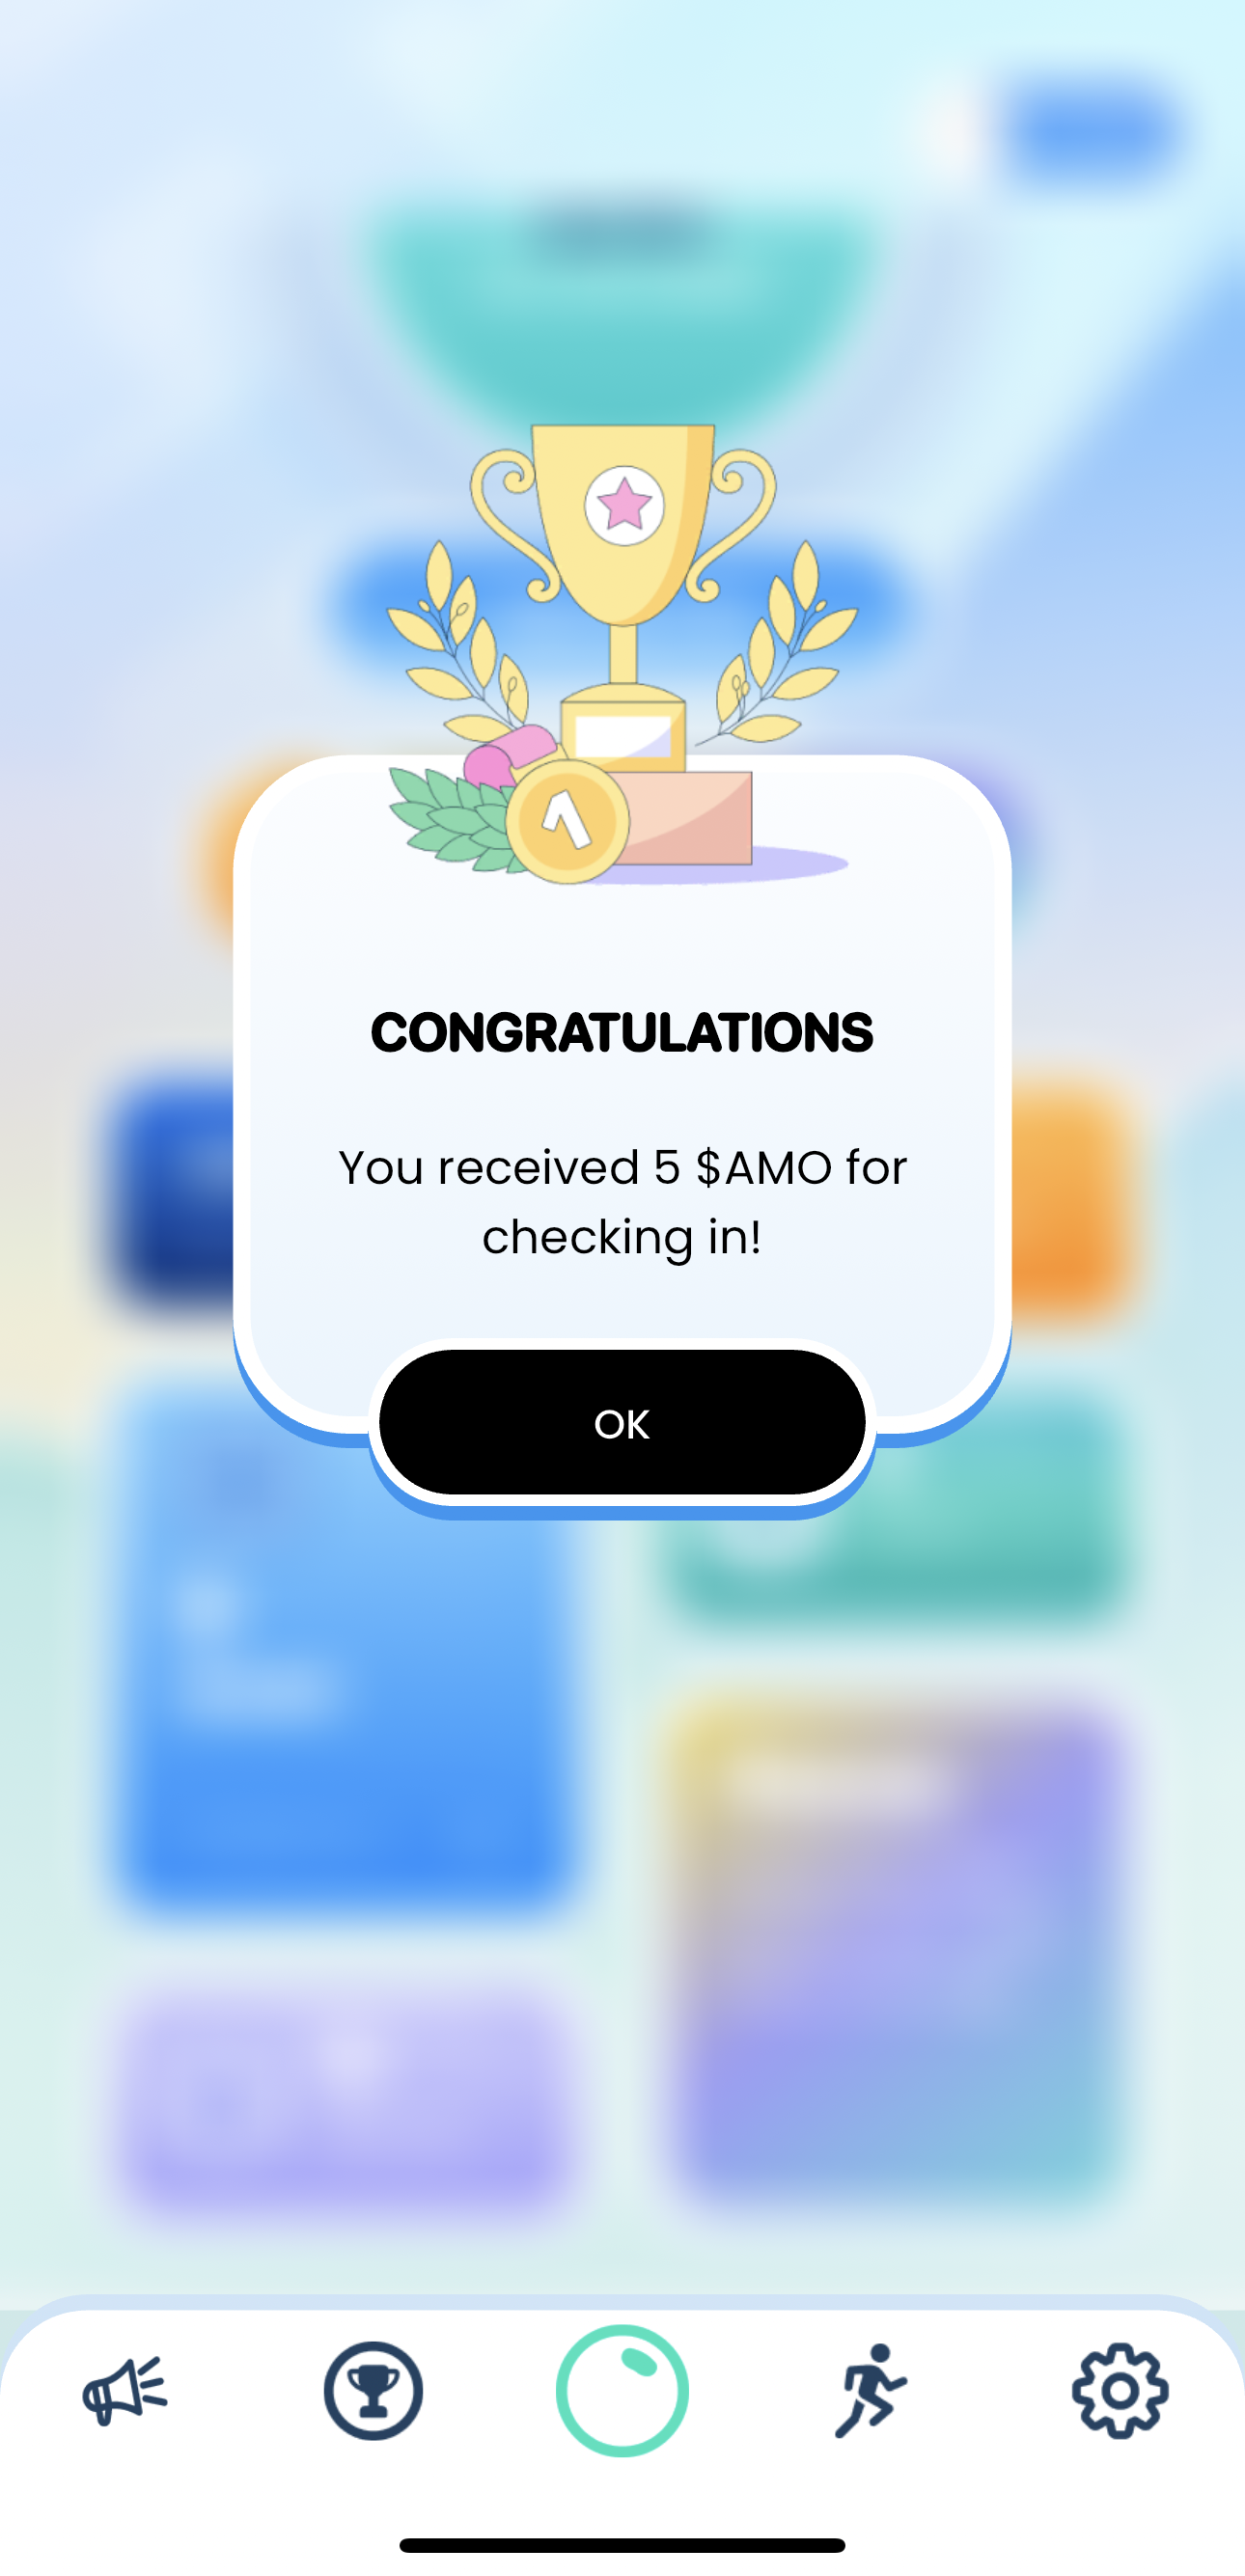 Users need to visit the app every day to check in and earn $AMO. Additionally, checking in daily is essential to build a streak and receive even more $AMO.